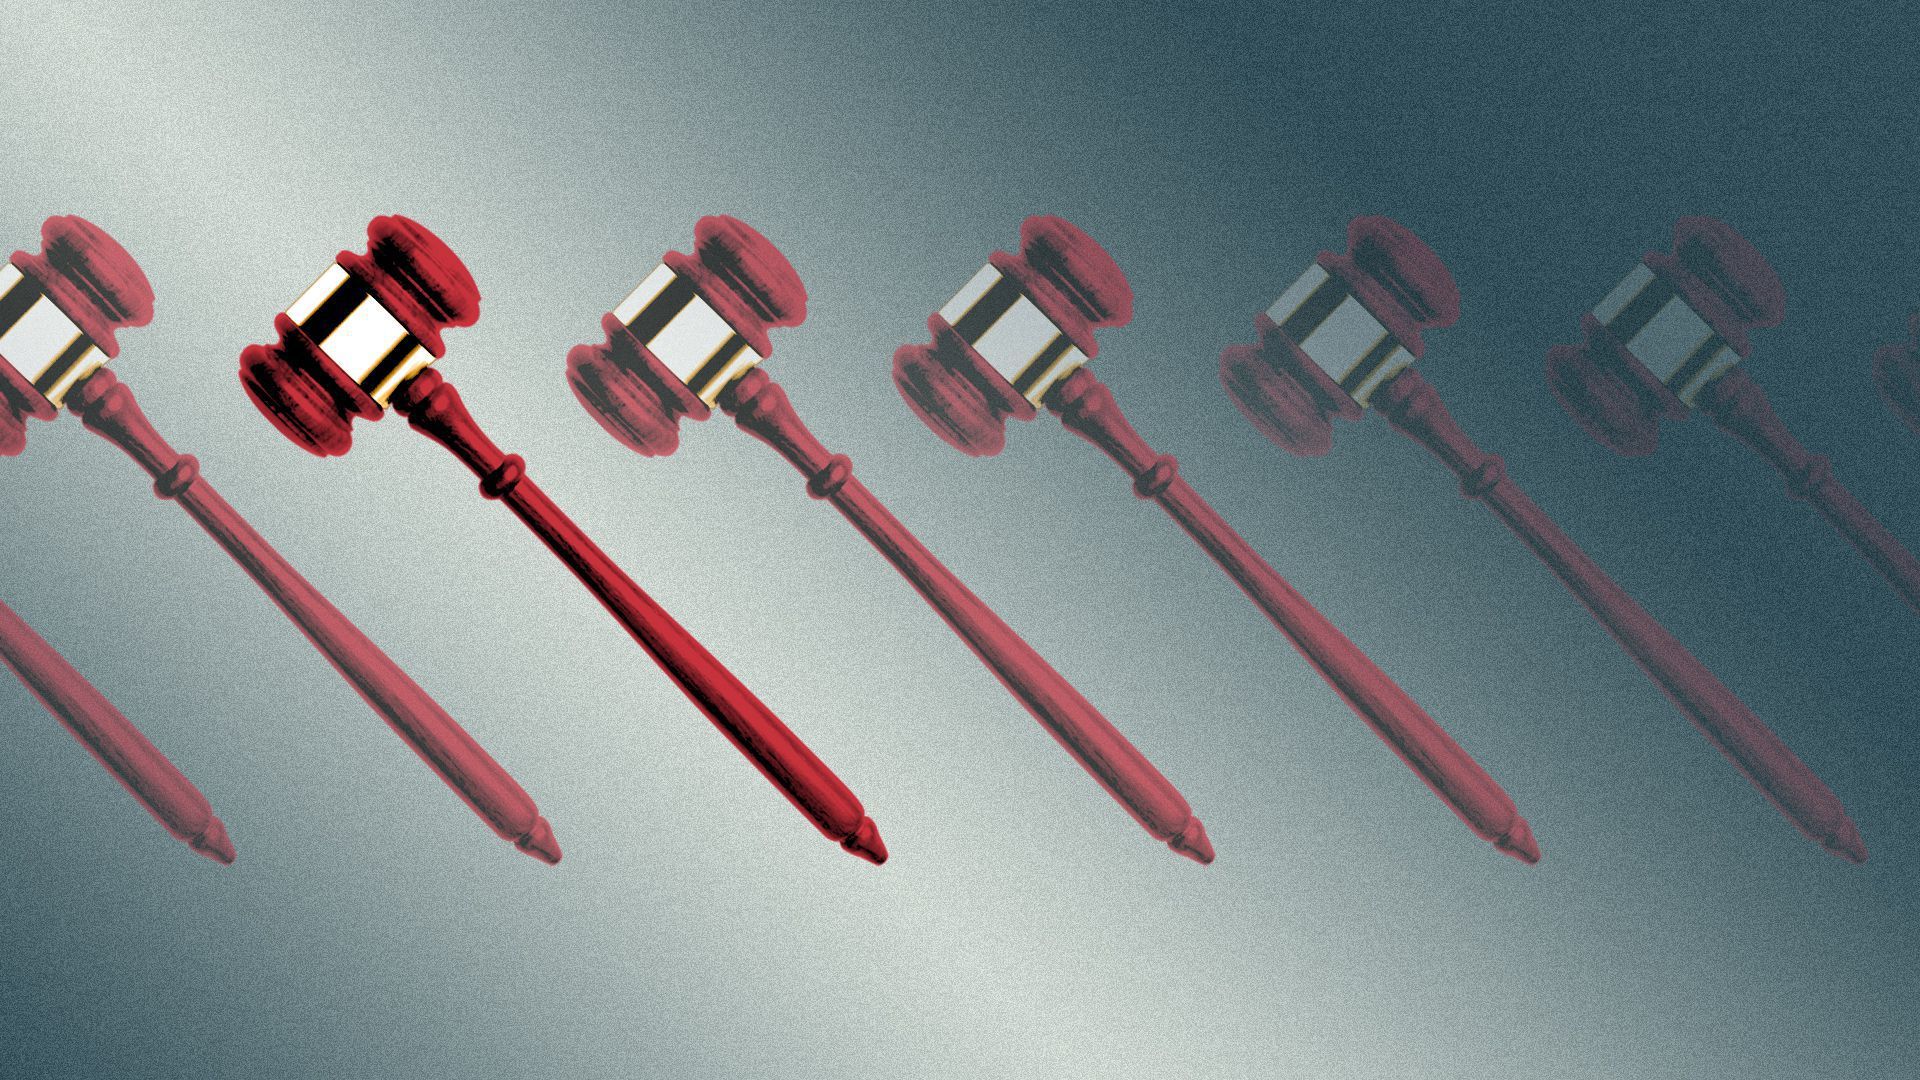 An illustration of many gavels